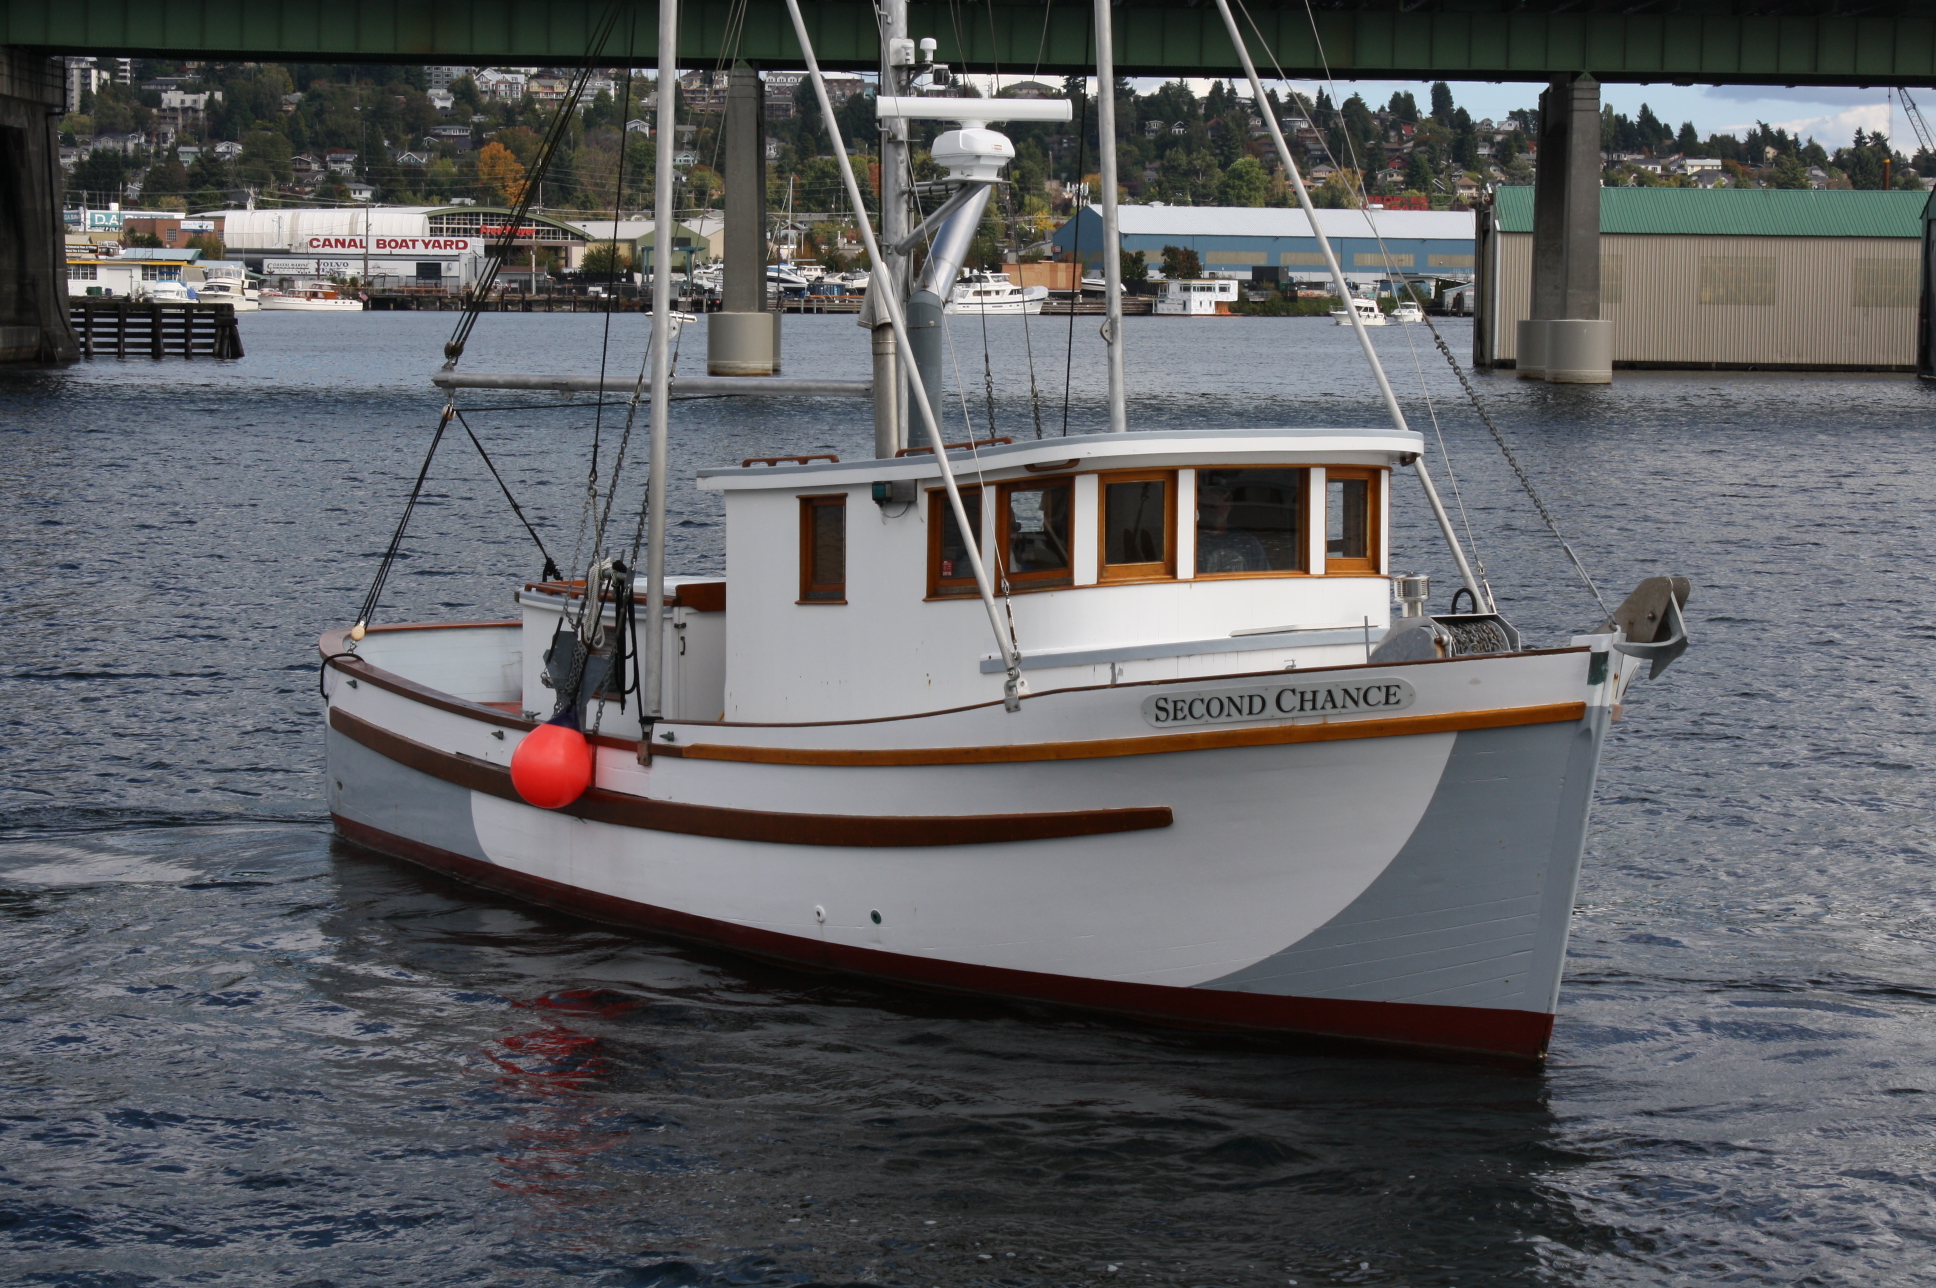 SOLD !!! – 36’ Stockland ‘Troller’ 1967 – $25,000 – Seattle, WA